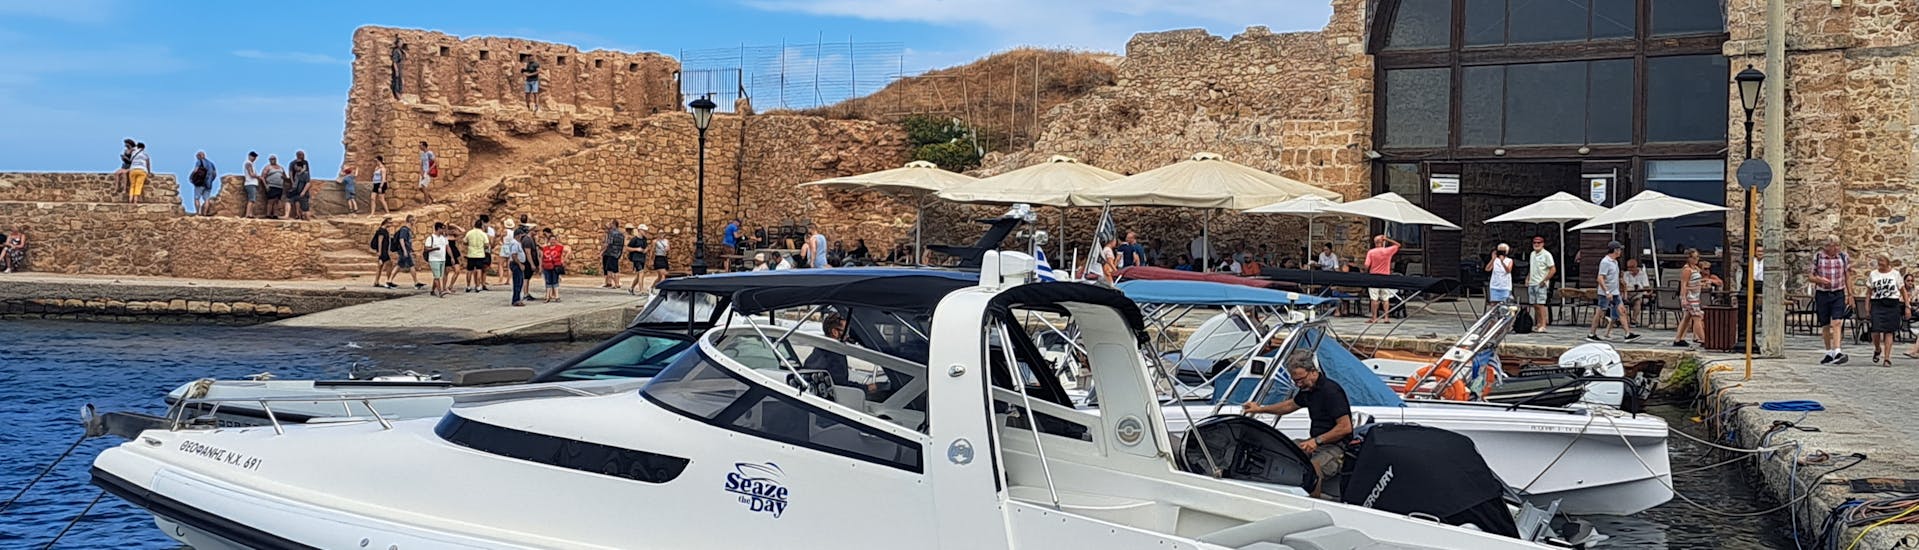 Picture of a RIB boat on the water during a boat trip organized by SEAze The Day Crete.